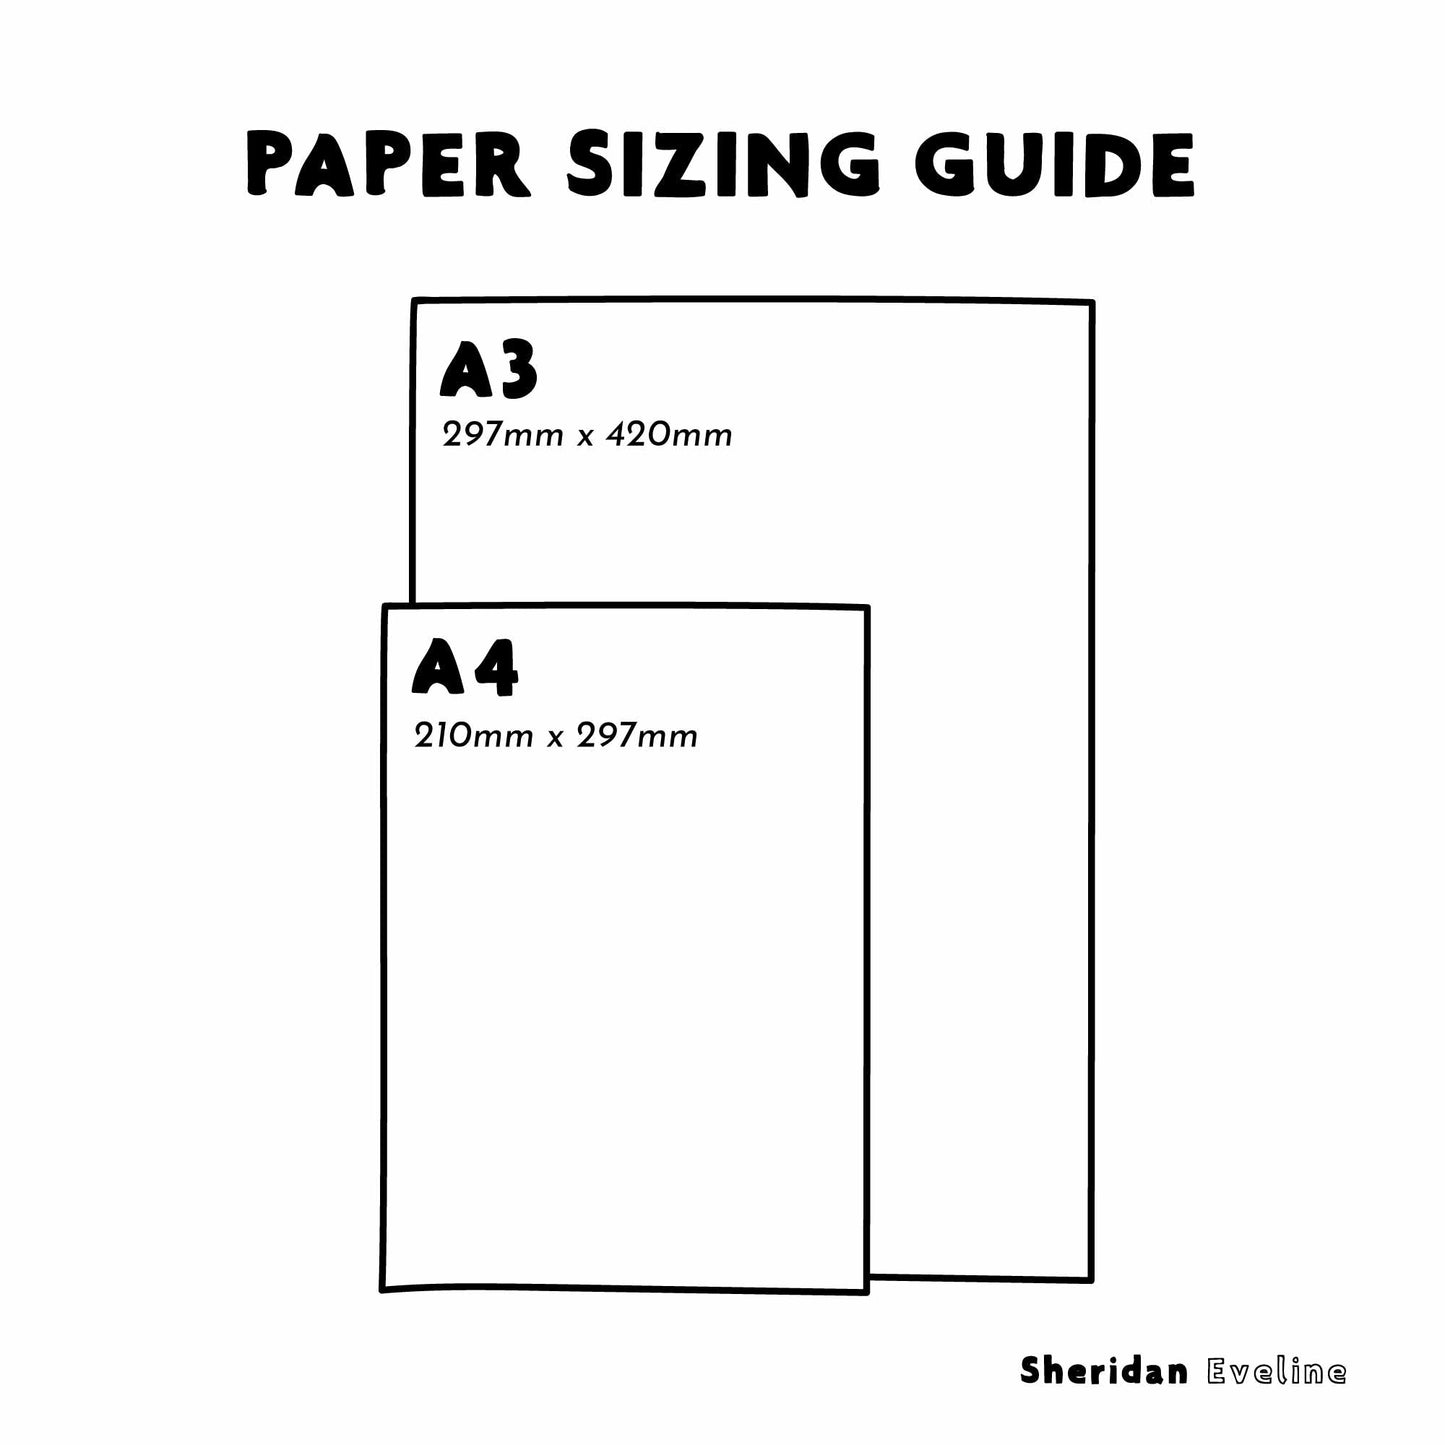 Sheridan Eveline - Paper Sizing Guide - A4 & A3